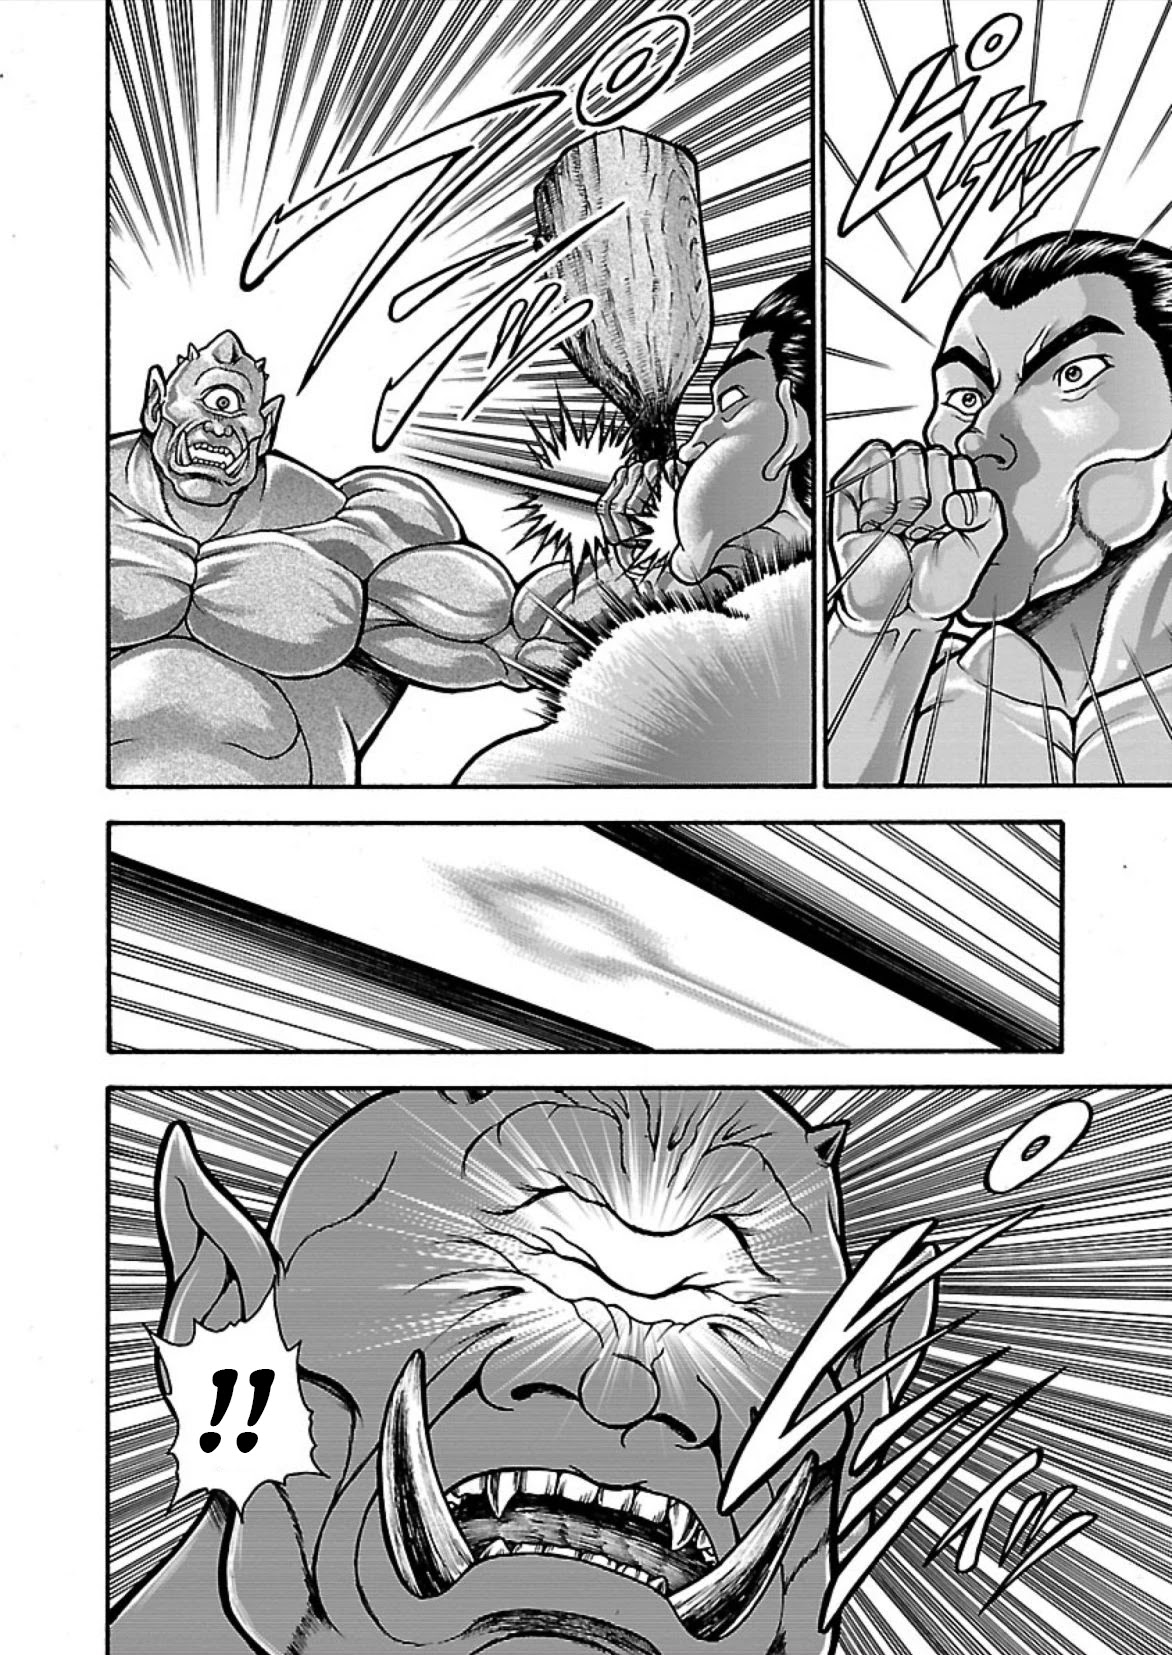 Baki Side Story - Retsu Kaioh Doesn't Mind Even If It's In Another World - chapter 16.5 - #6